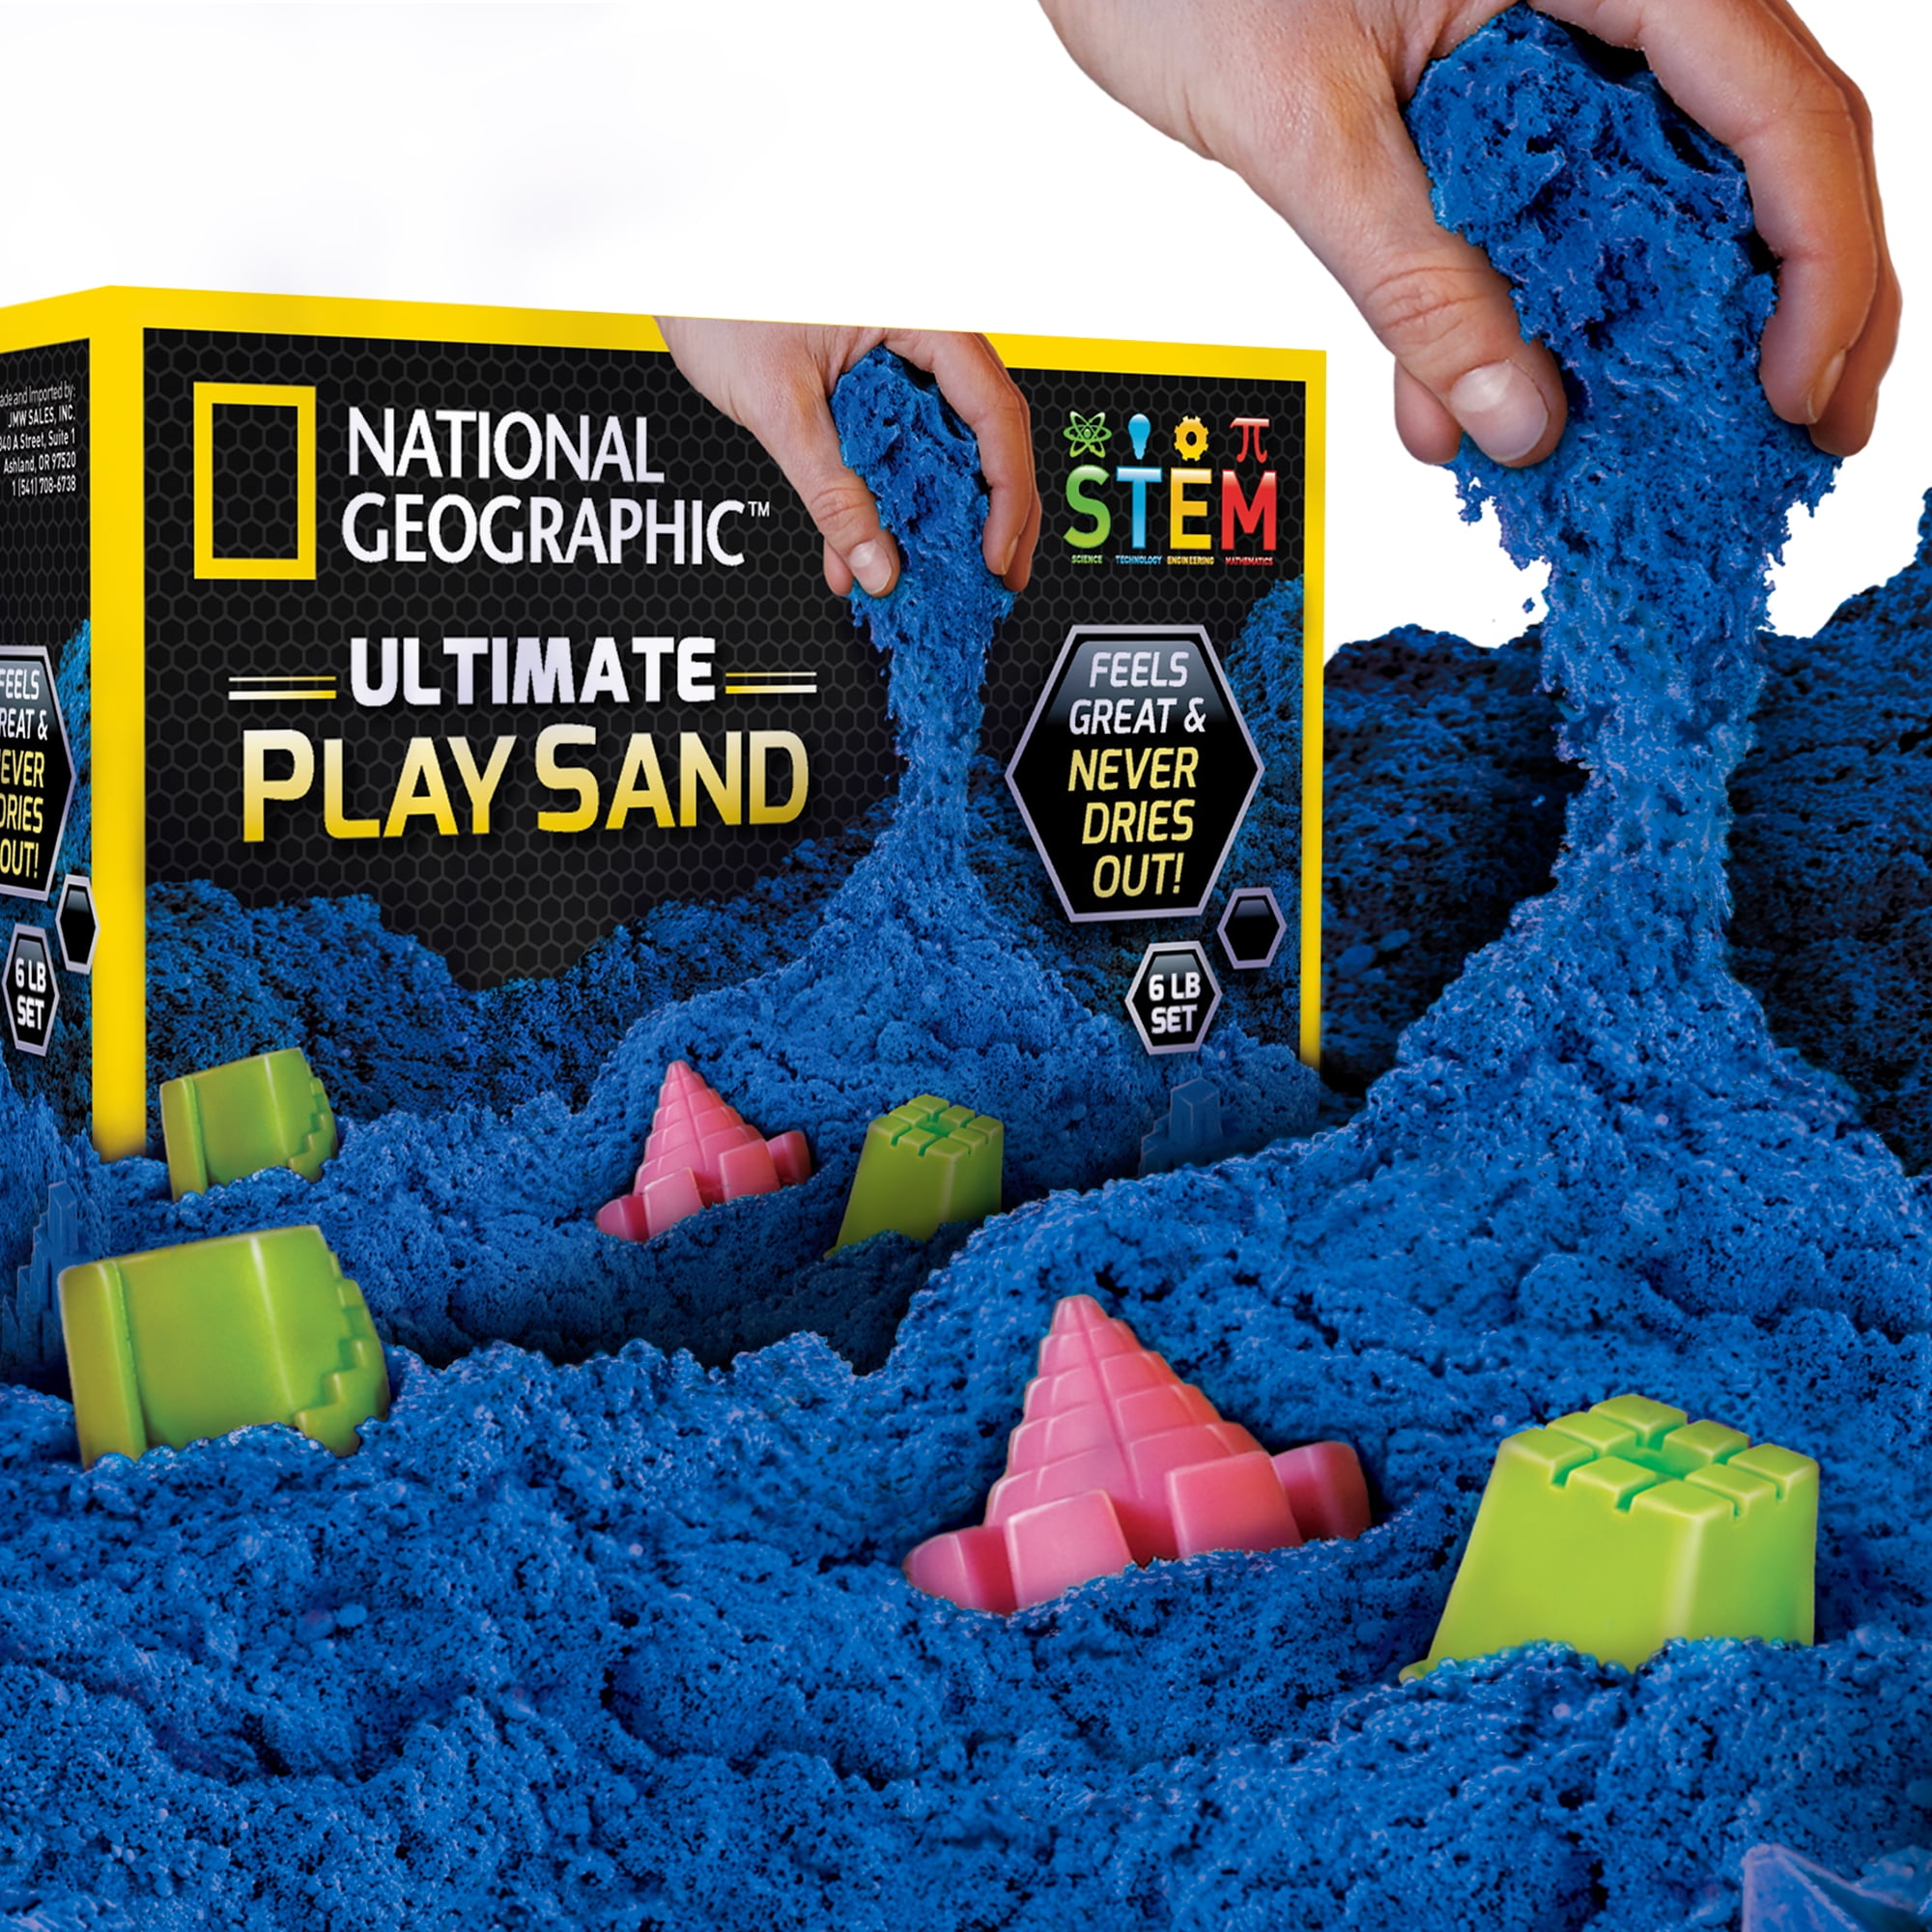 6-Lbs National Geographic Ultimate Blue Play Sand w/ 6 Castle Molds $9 + Free S&H w/ Walmart+ or $35+